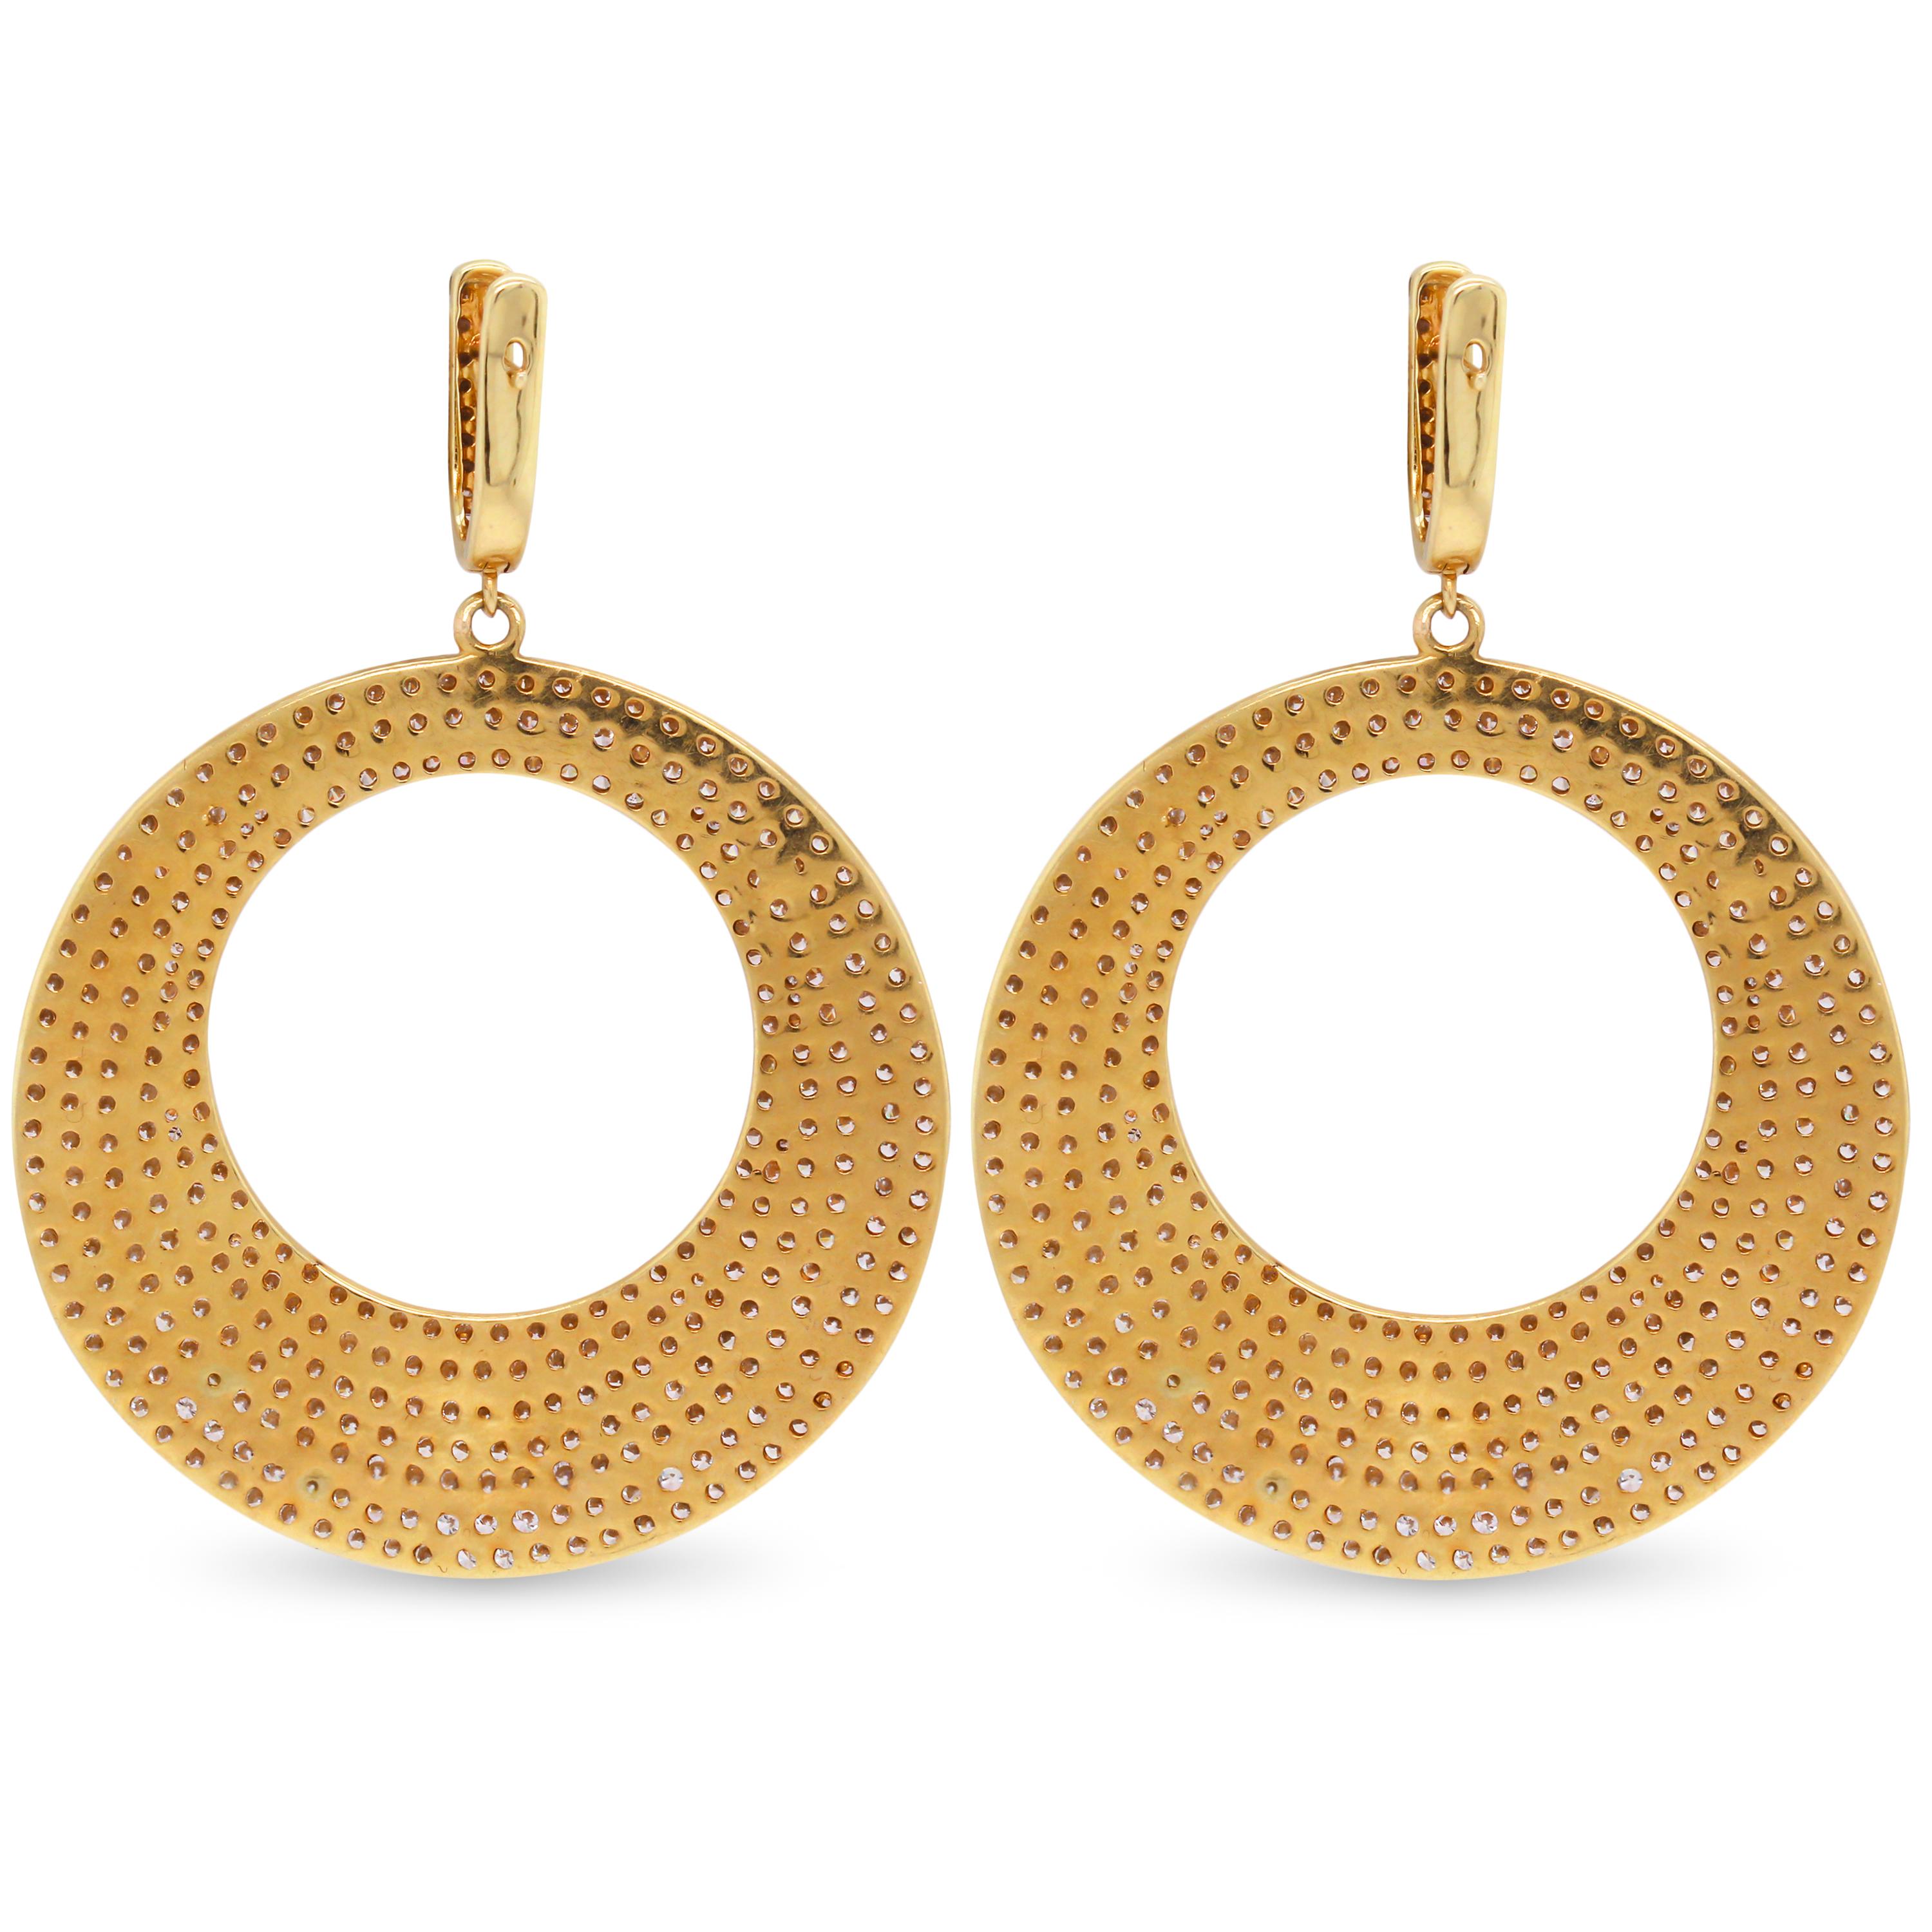 12.72 Carat Diamond 18K Yellow Gold Large Round Door Knocker Earrings

This beautiful pair of door knocker earrings feature 12.72 carat F-G color, VVS1-VS1 clarity diamonds

Earrings are 2.38 inch in length by 1.72 inch in width.

Diamonds are set